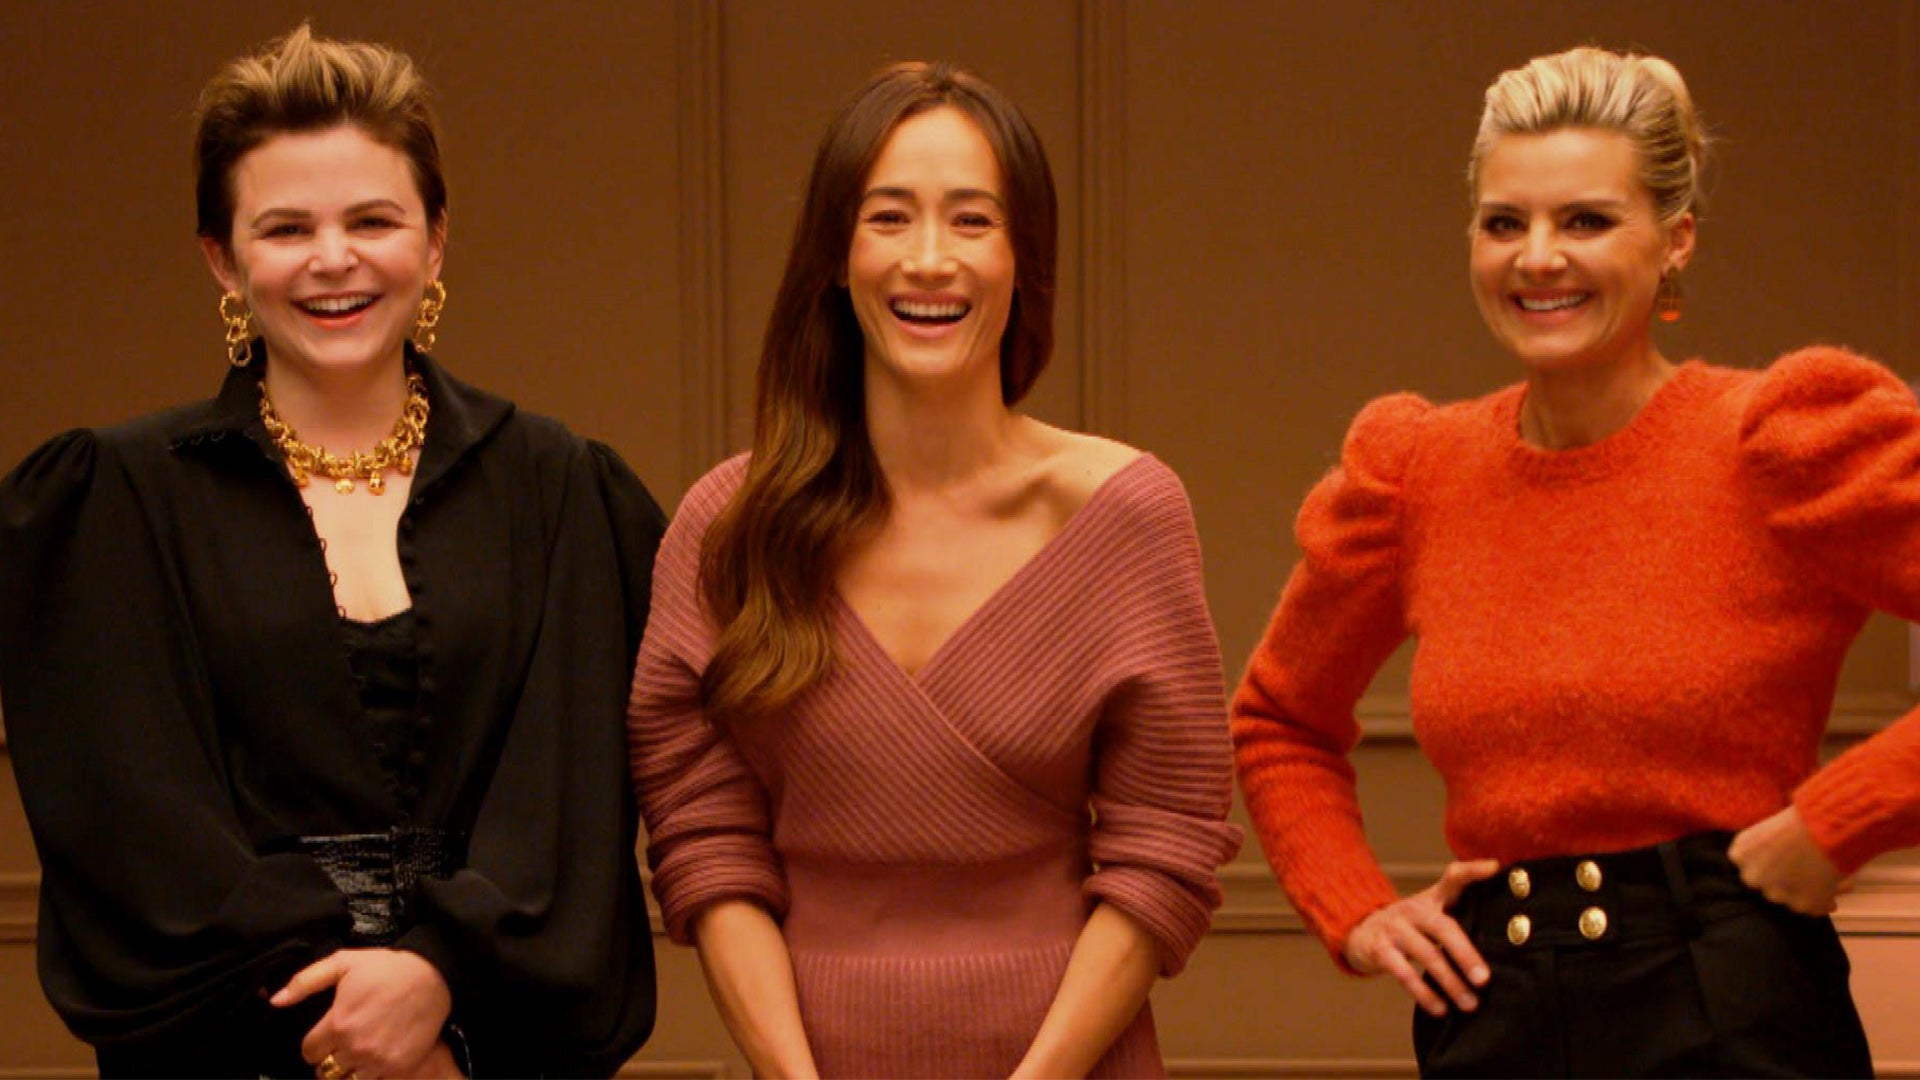 'Pivoting': Ginnifer Goodwin, Maggie Q and Eliza Coupe Detail the New Comedy Series (Exclusive)